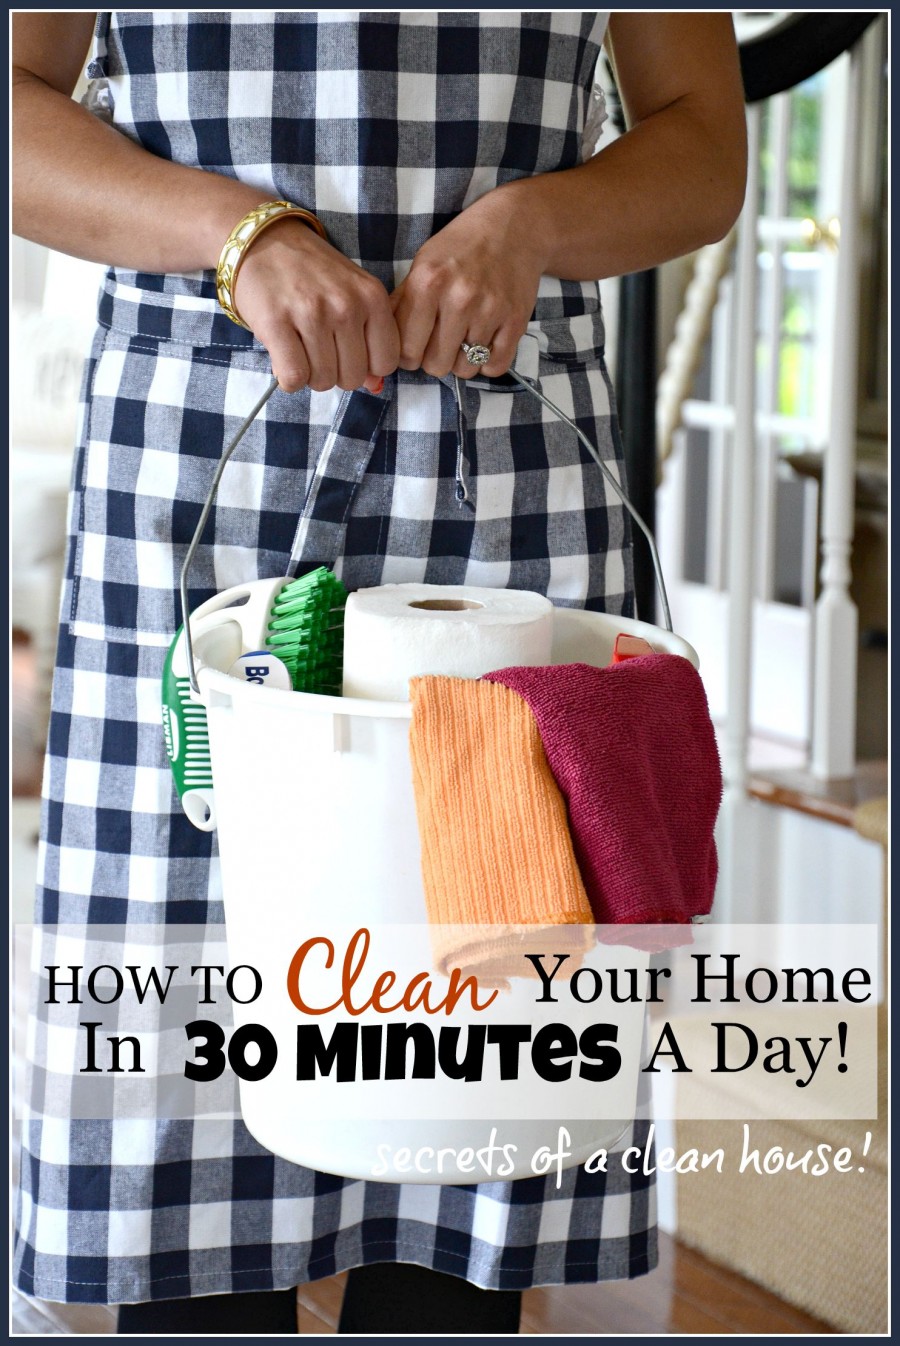 HOW TO CLEAN YOU HOME IN 30 MINUTES A DAY! Tips for a clean house-stonegableblog.com